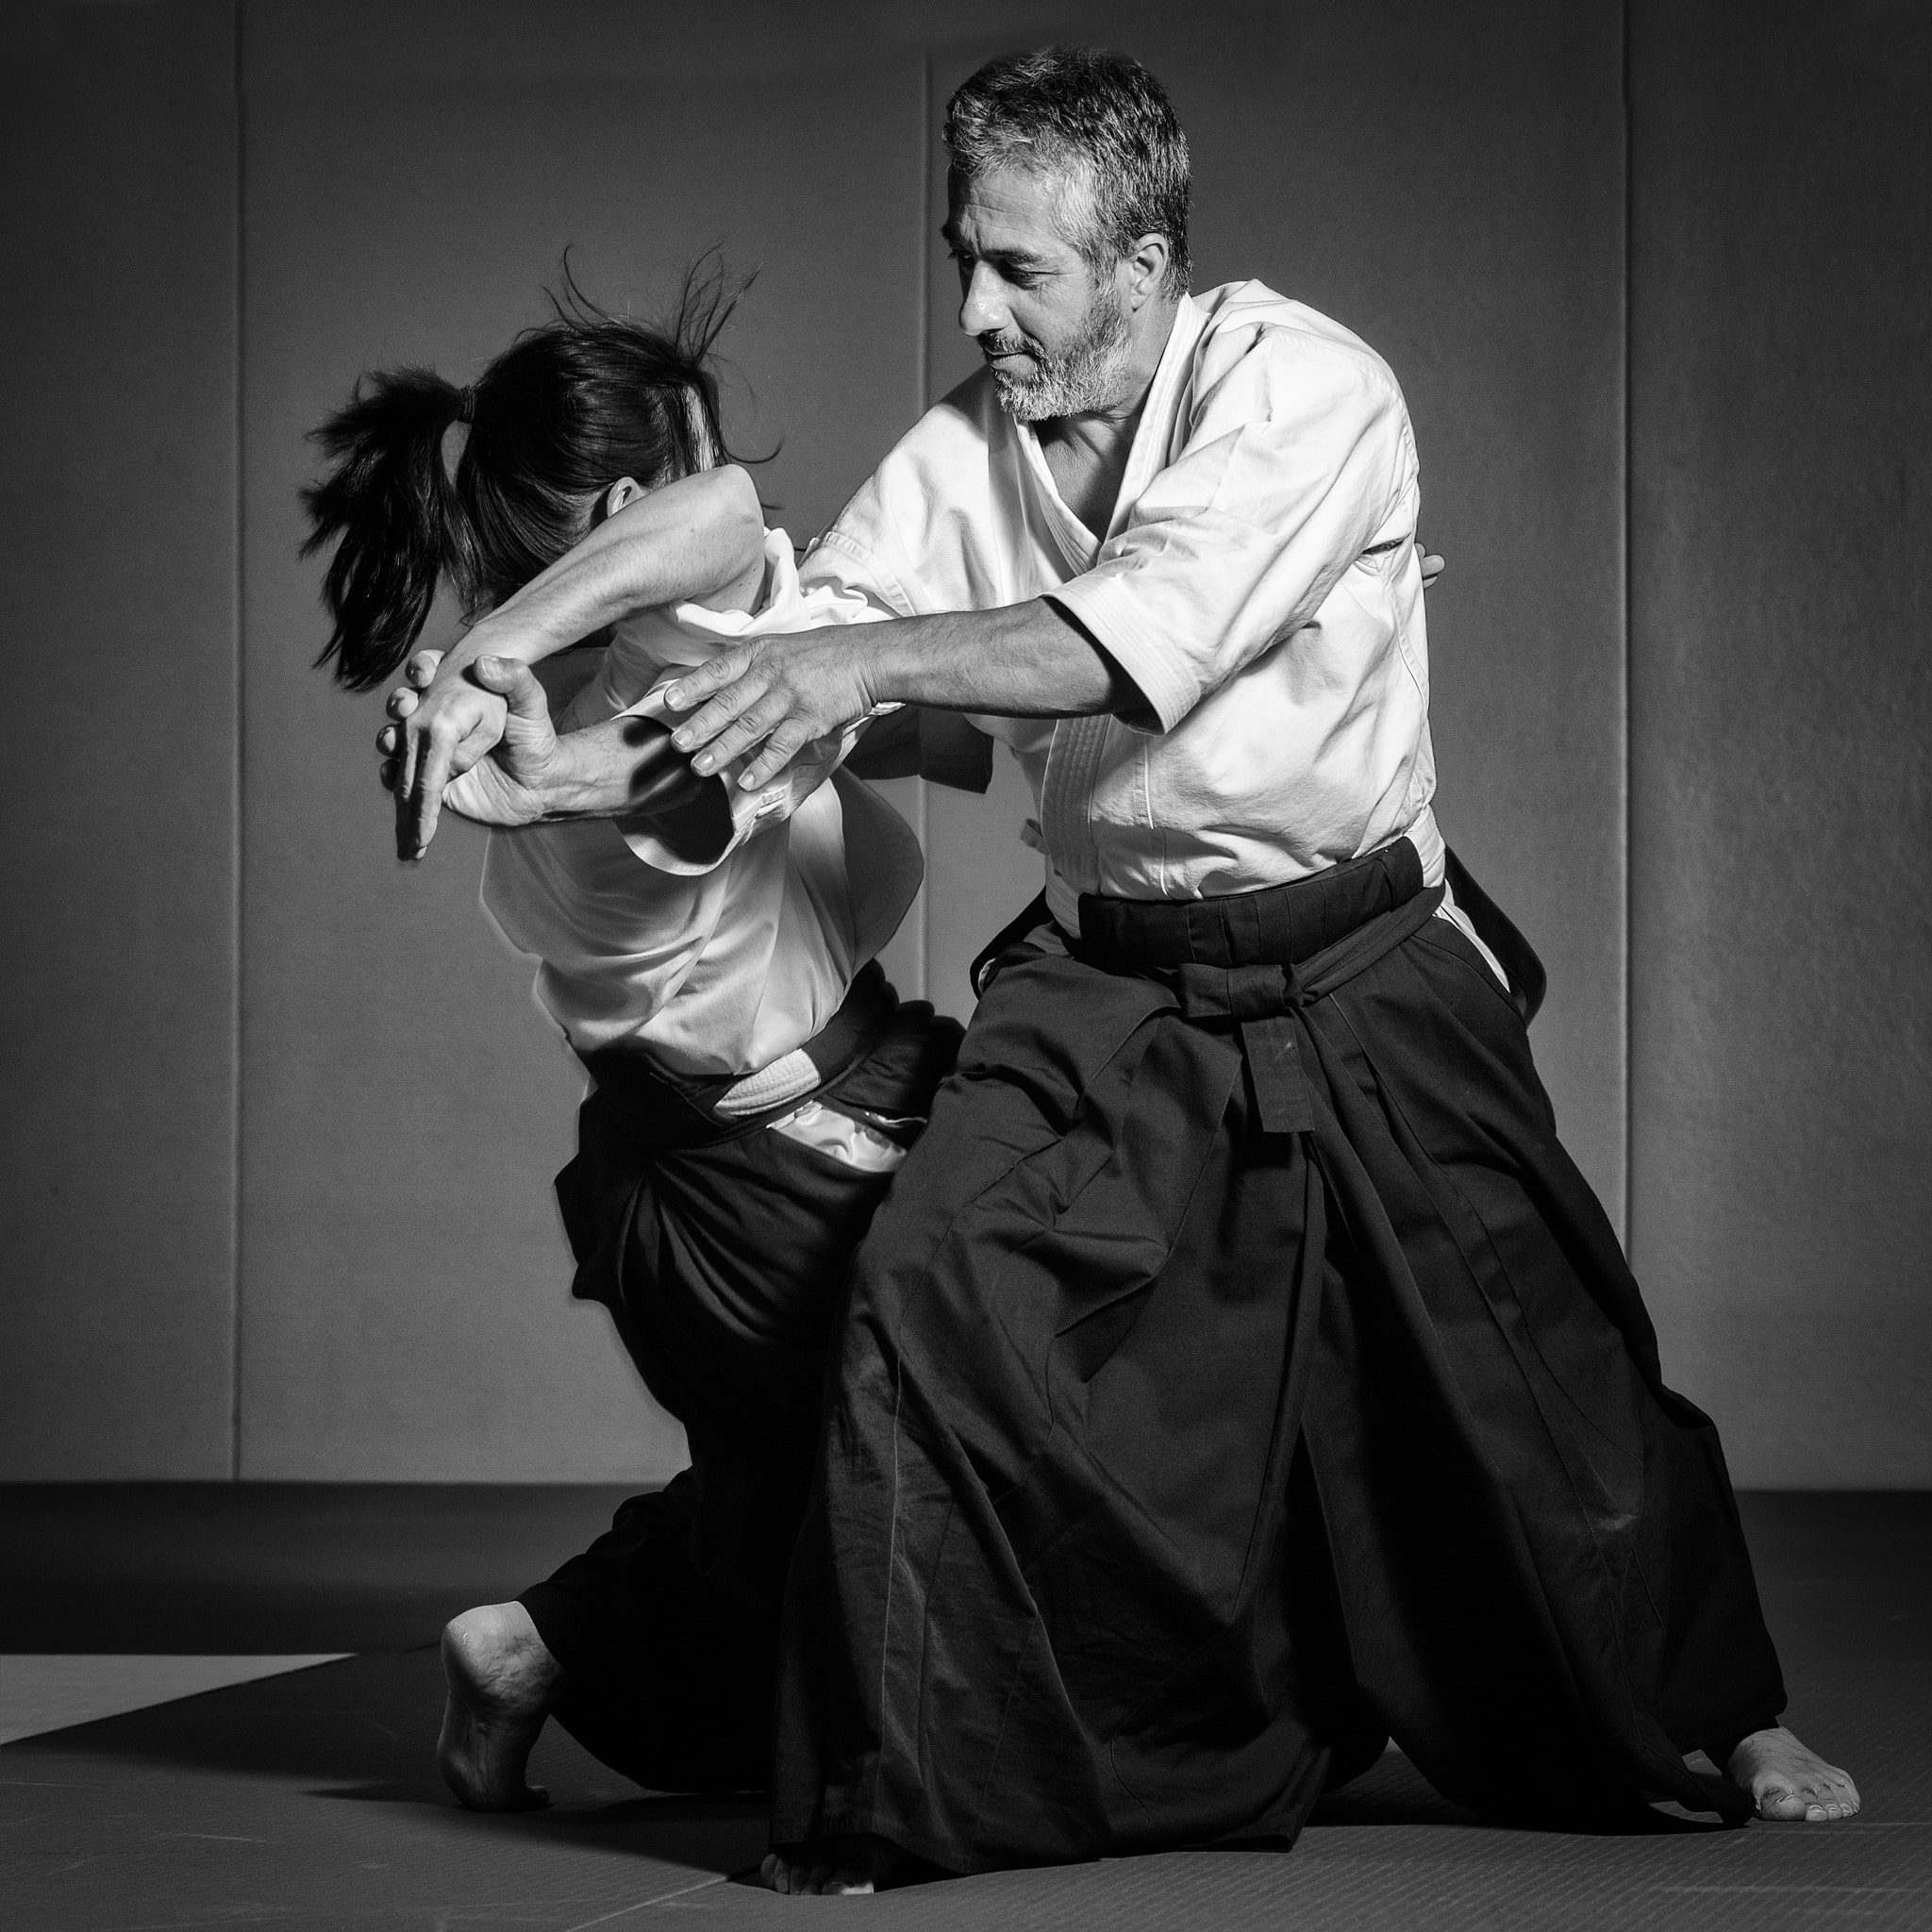 Image - Vineuil Sports Aikido